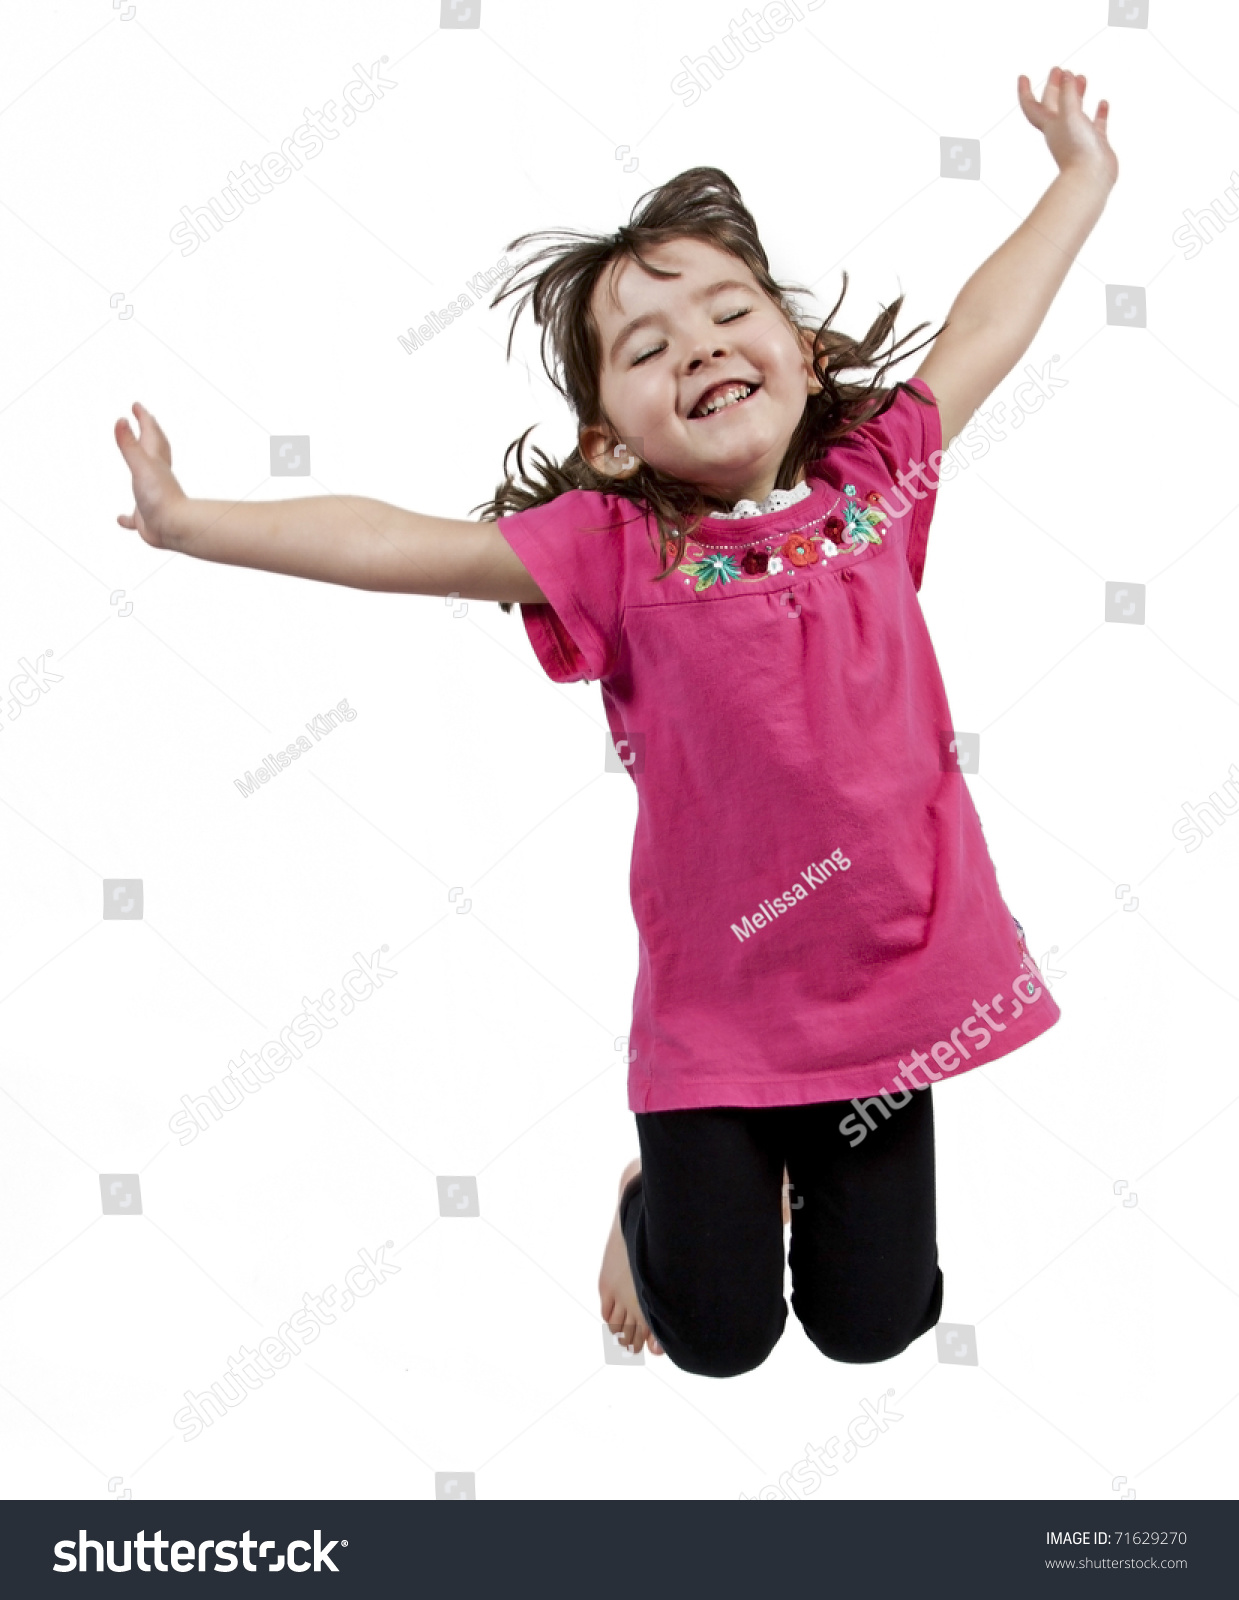 Adorable And Happy Little Girl Jumping In Air. Isolated On White ...